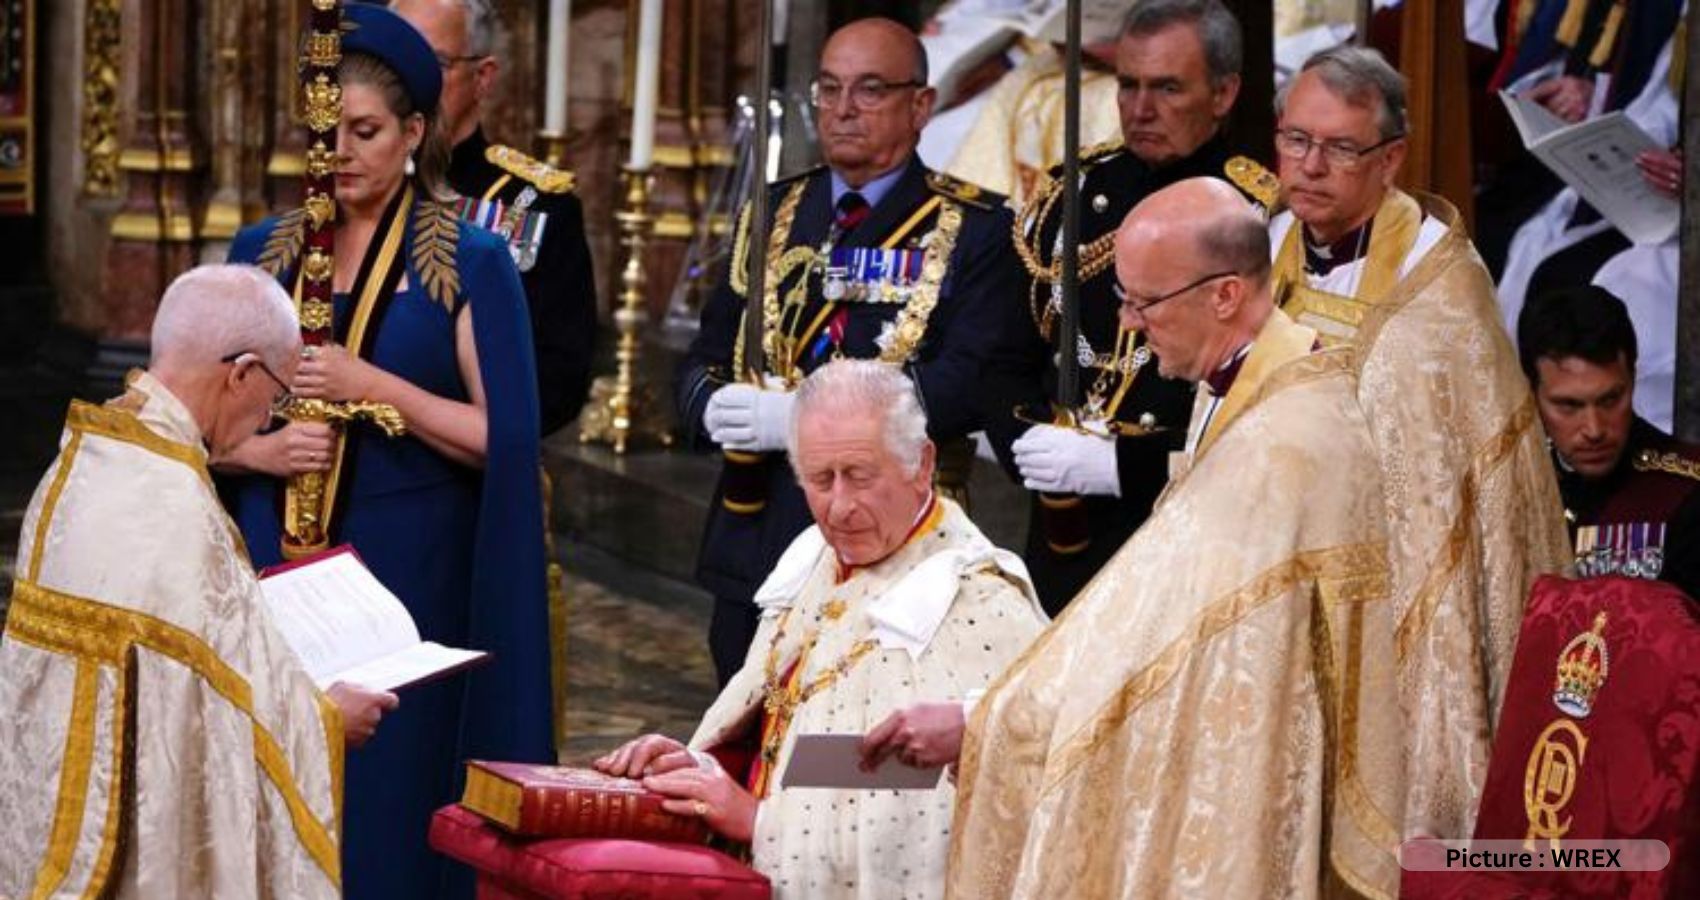 Charles III Crowned As King Of United Kingdom In Once-In-A-Generation Ceremony